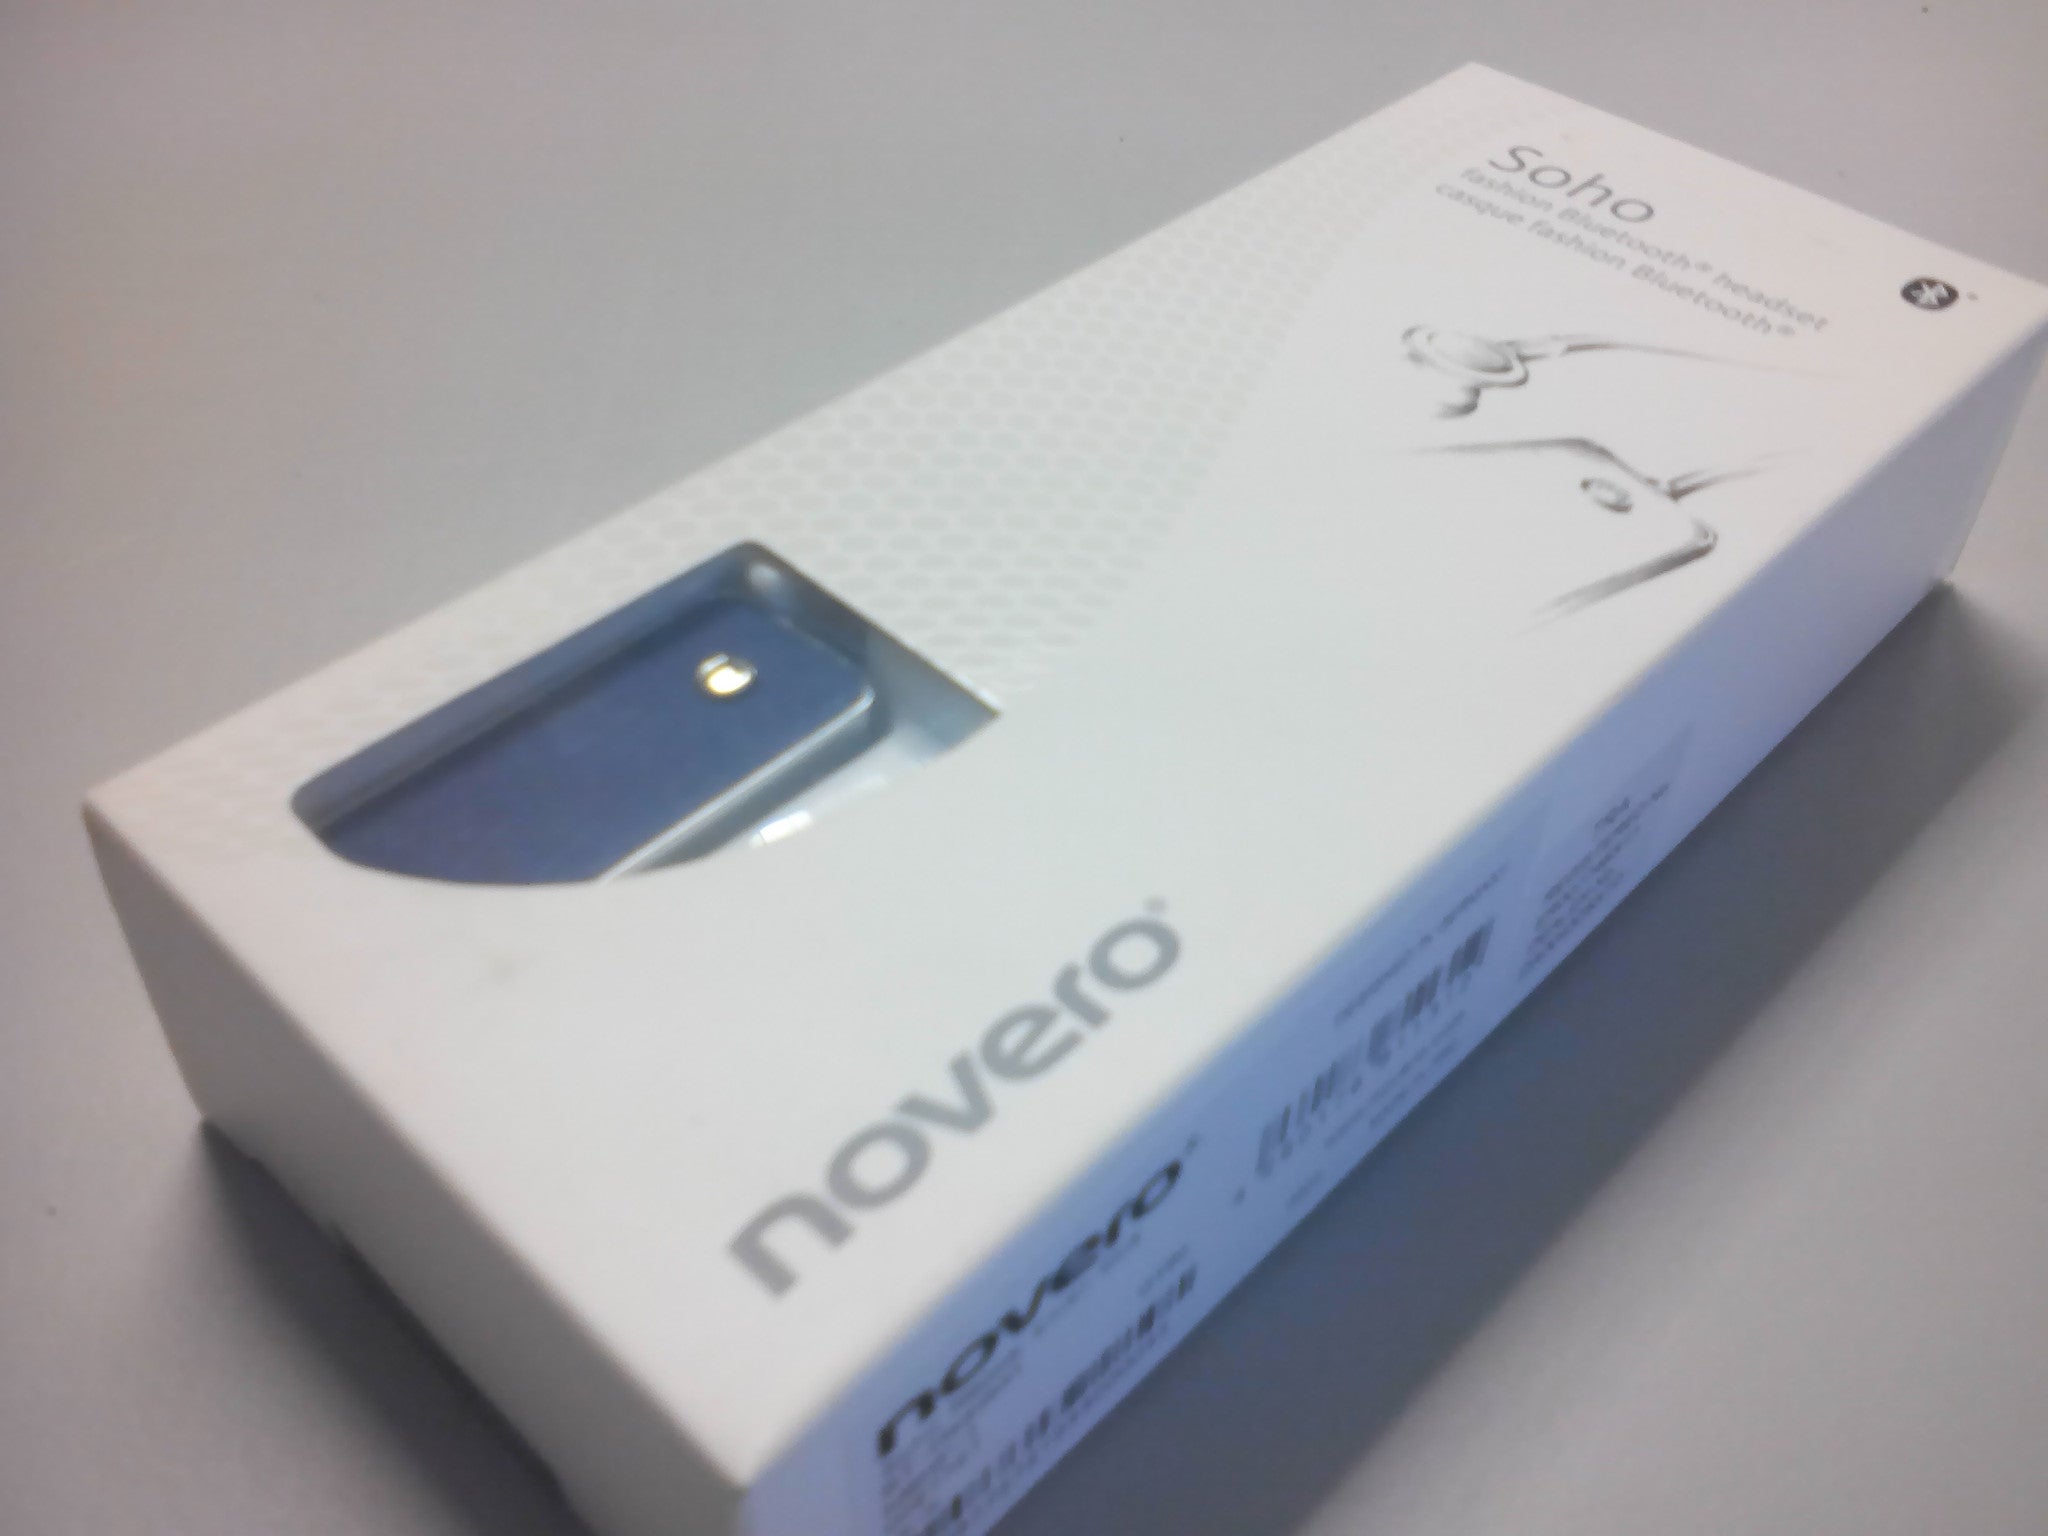 Novero Soho Nappa Bluetooth Headphones - Silver / Blue - PC User | PC Parts And Spares | FREE UK DELIVERY